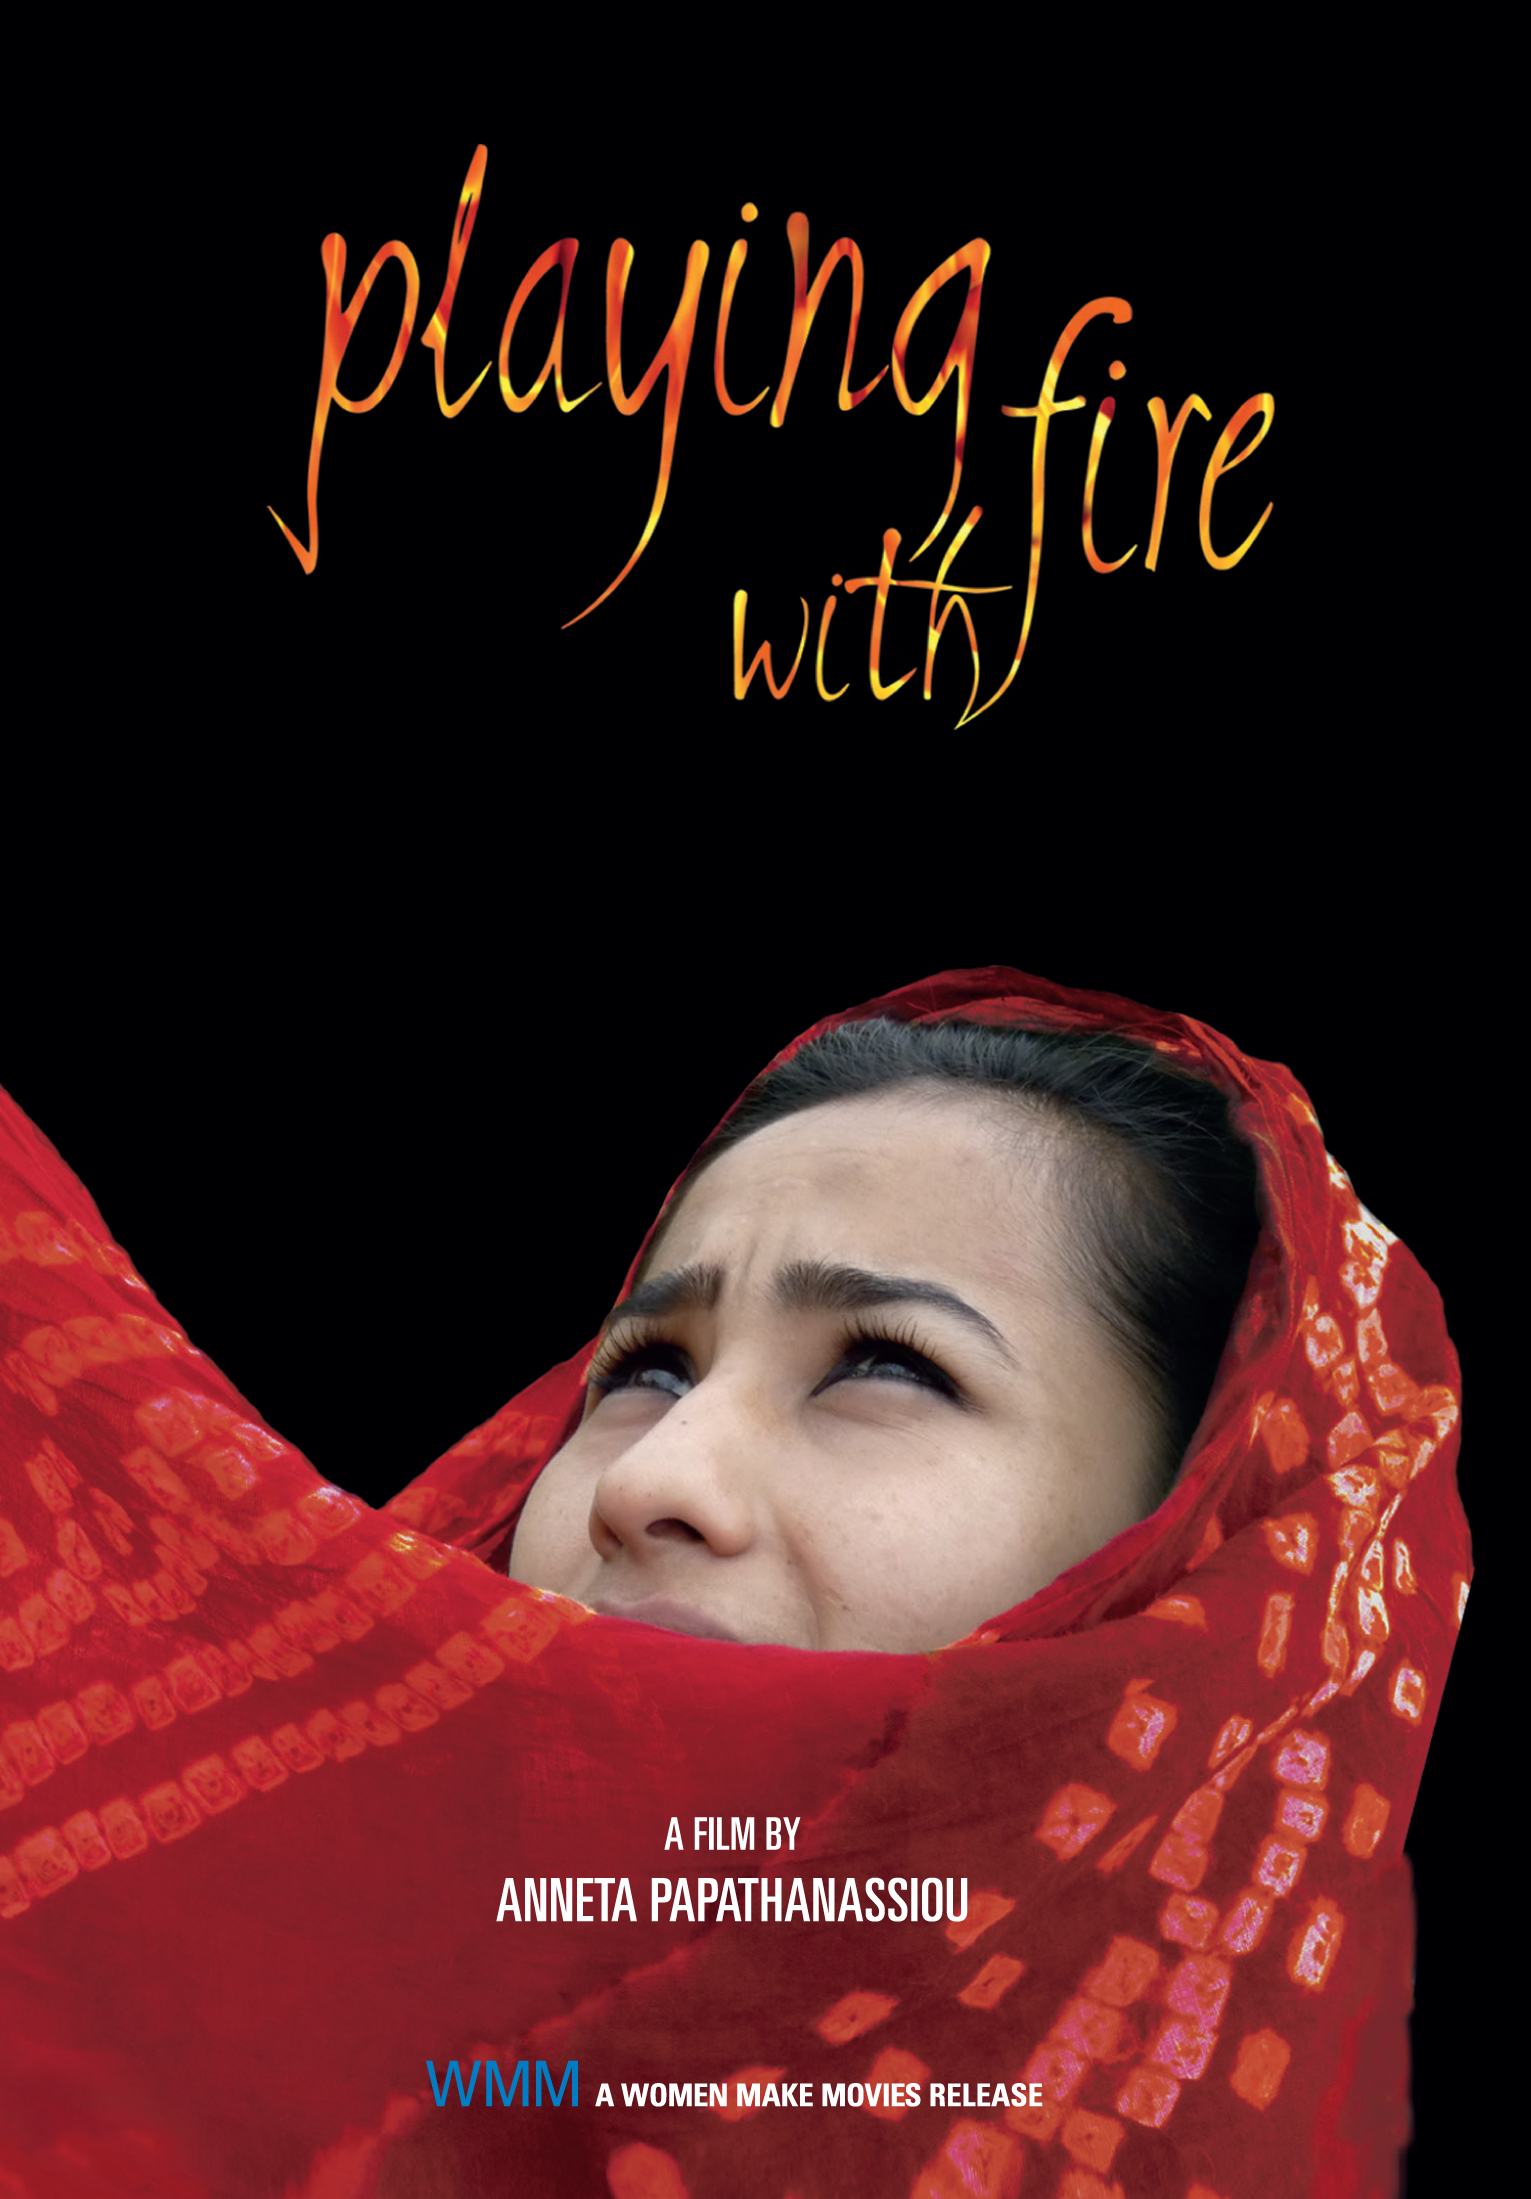 Movie Review  'Portrait of a Lady on Fire:' Vital film ignites passions,  breaks hearts